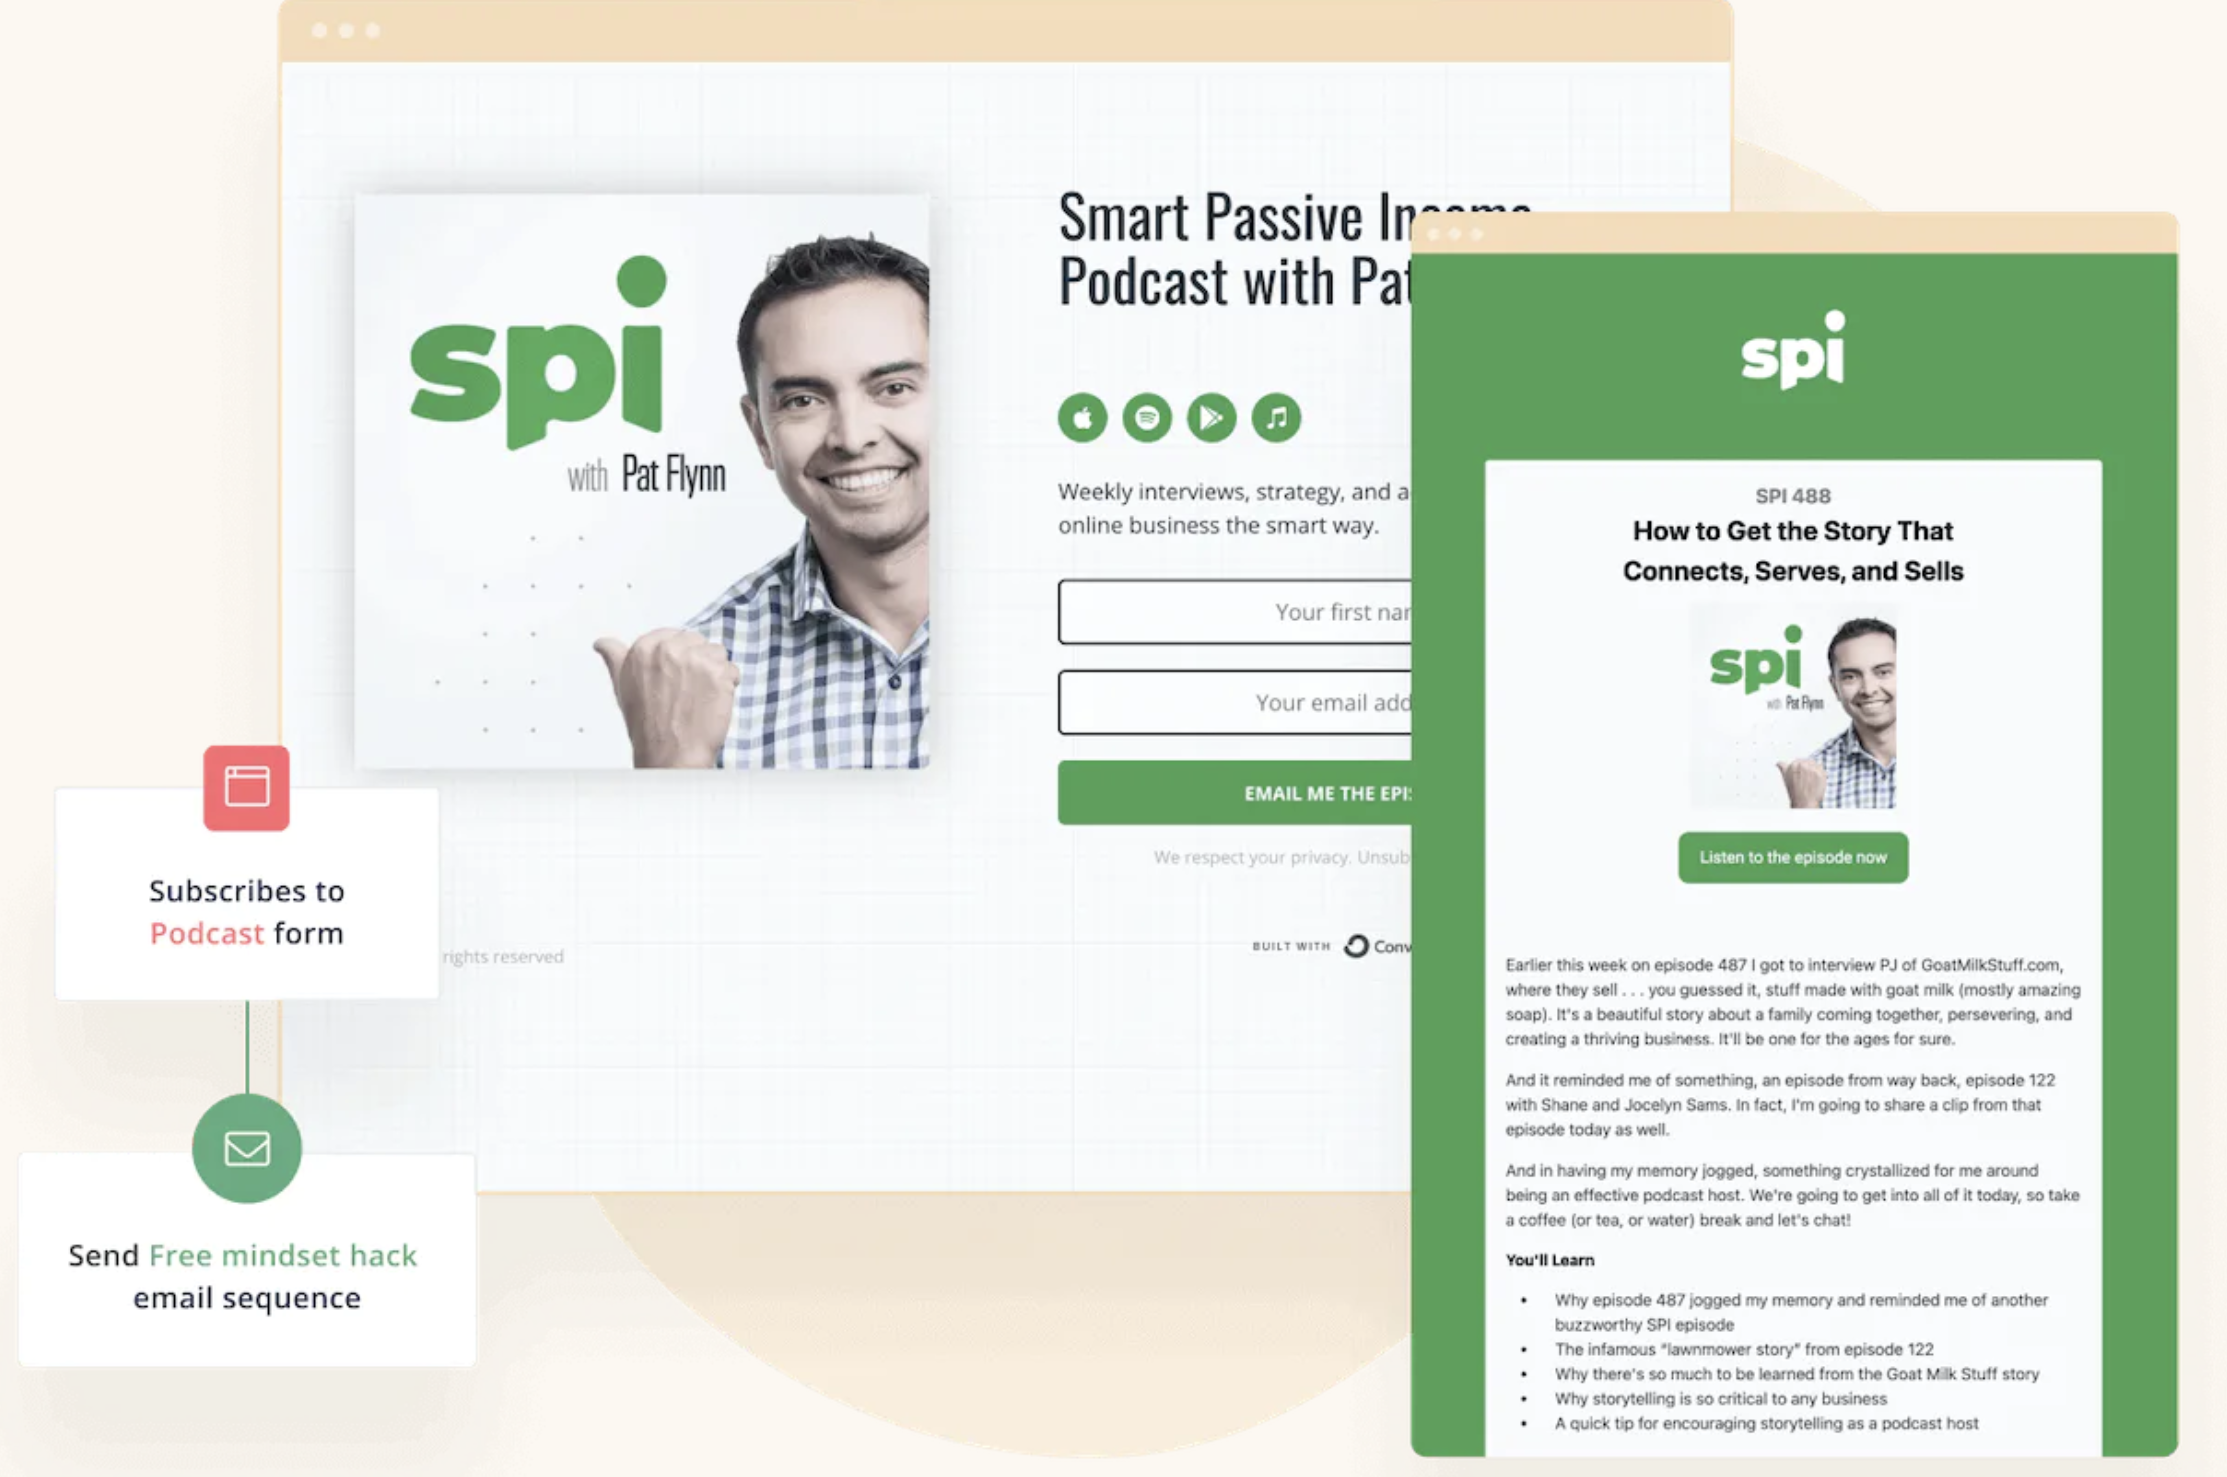 ConvertKit email featuring Pat Flynn's SPI podcast